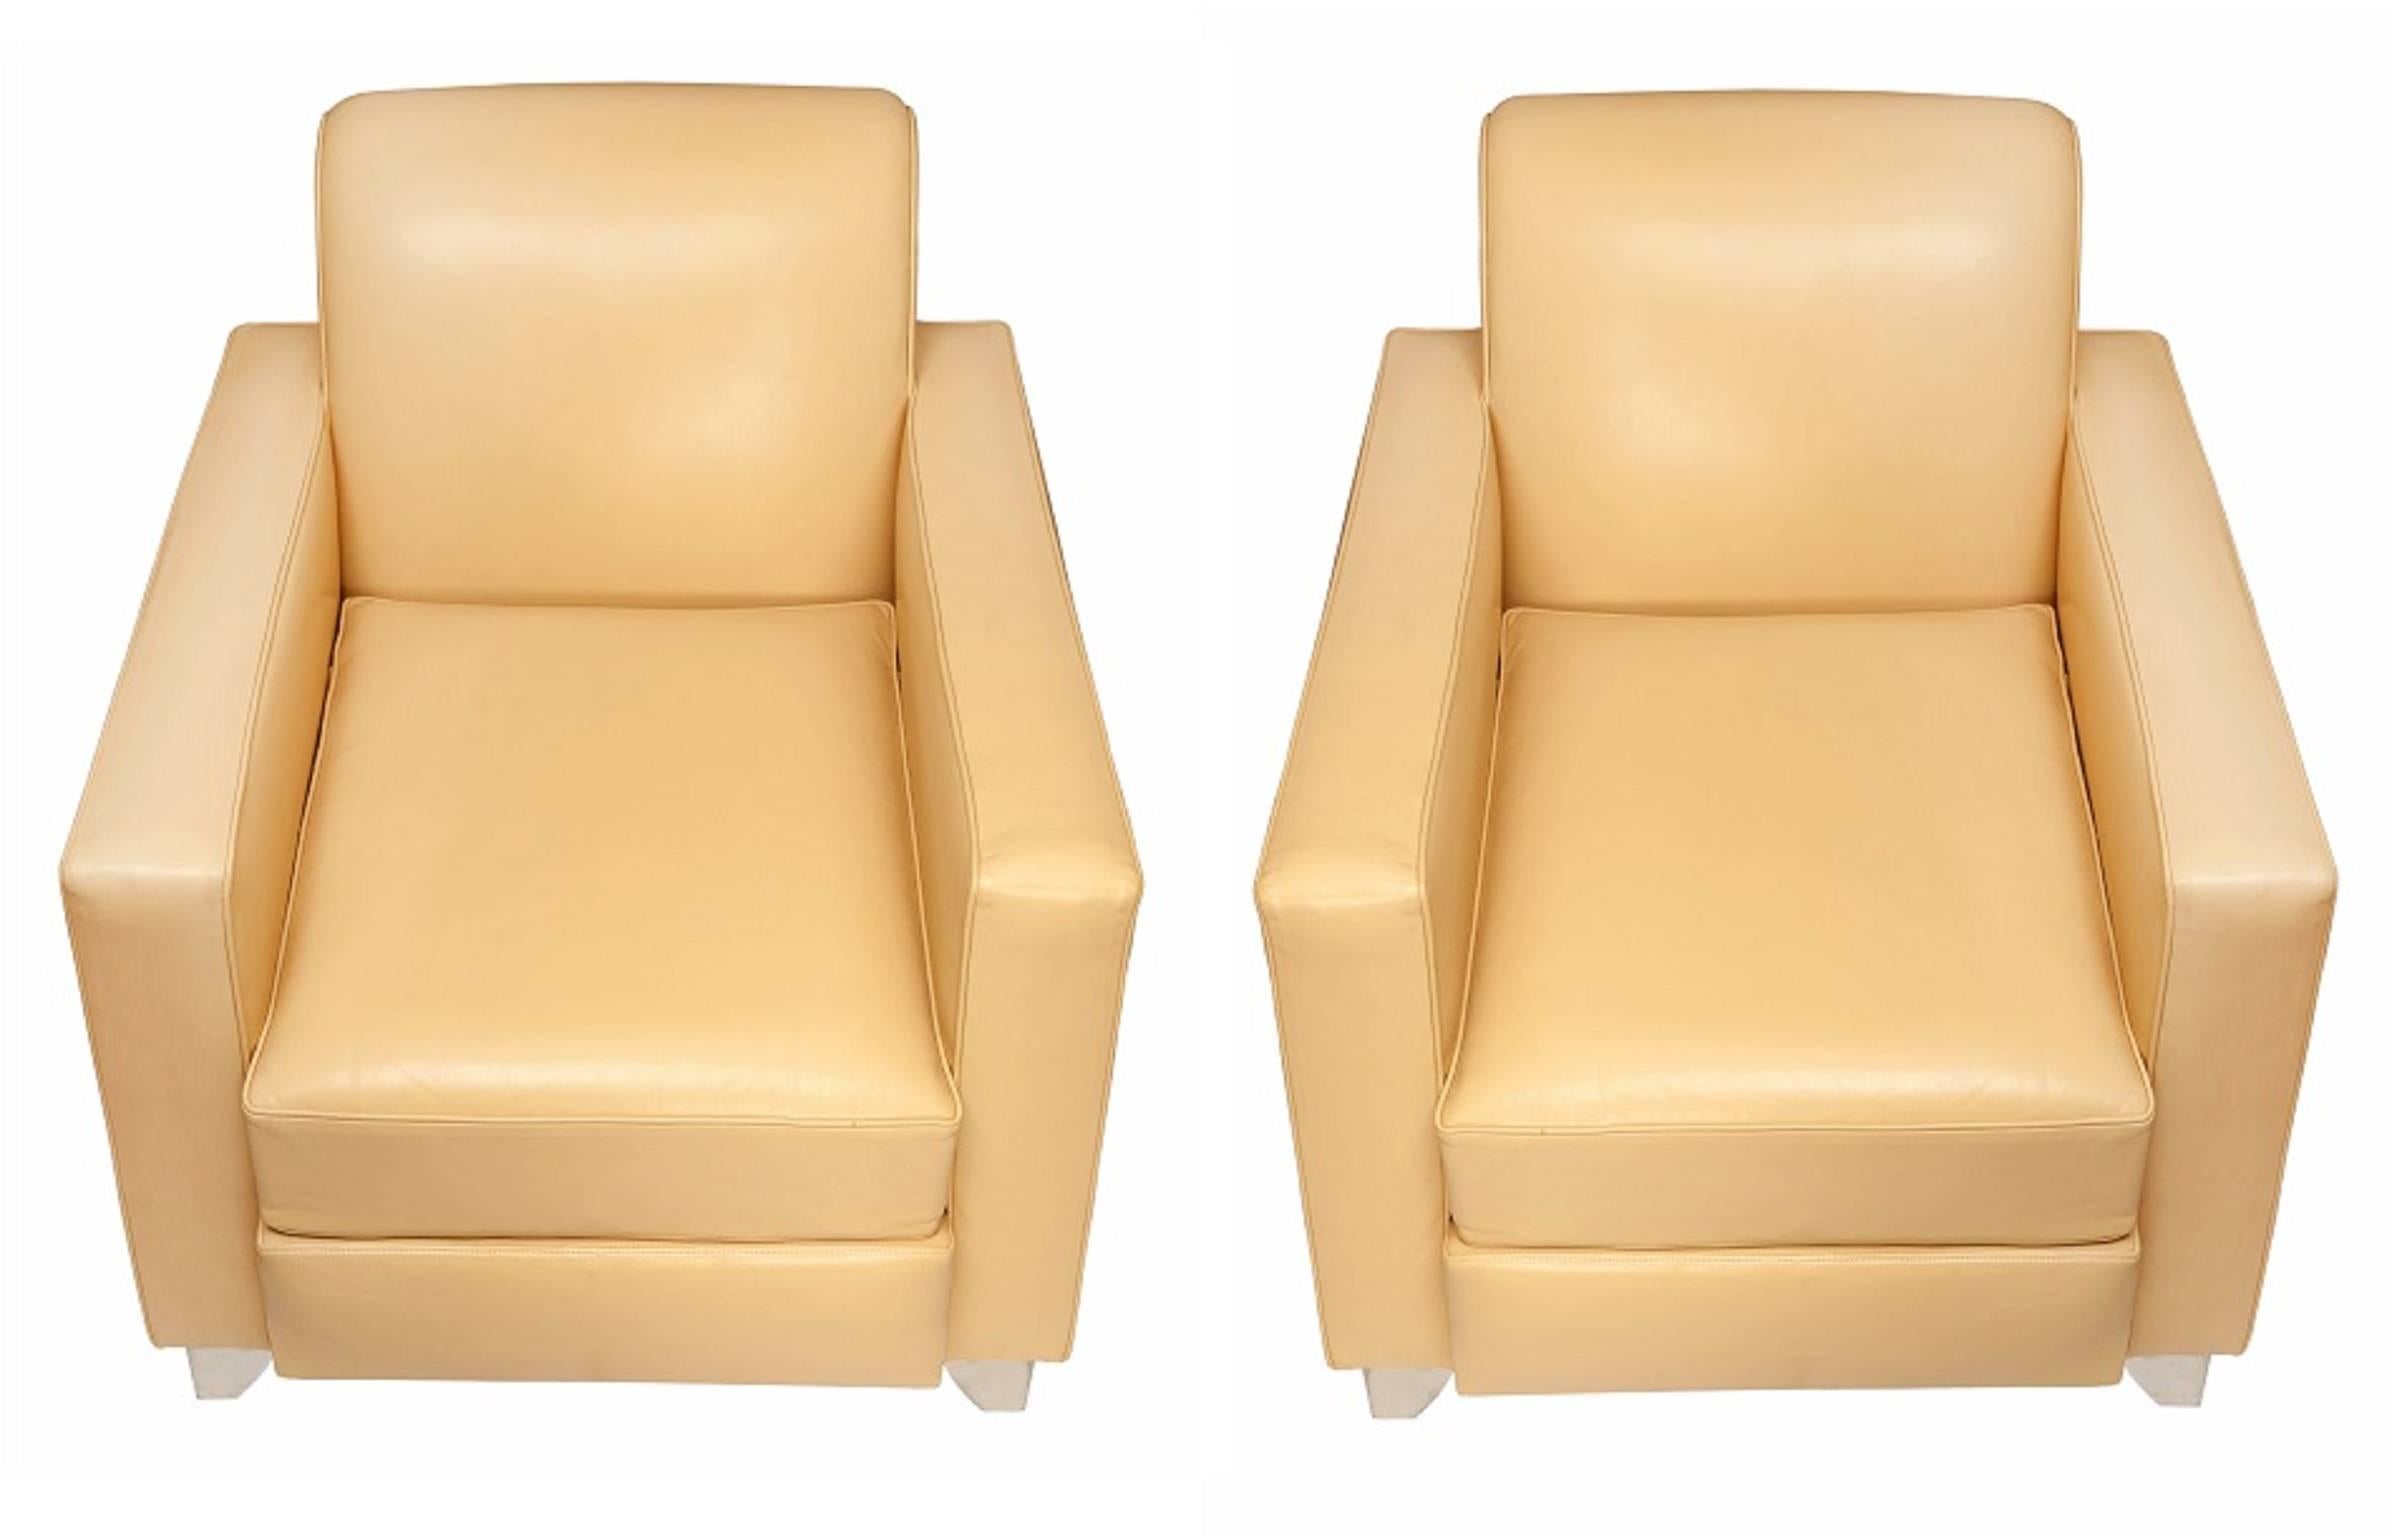 Pair of armchairs, 